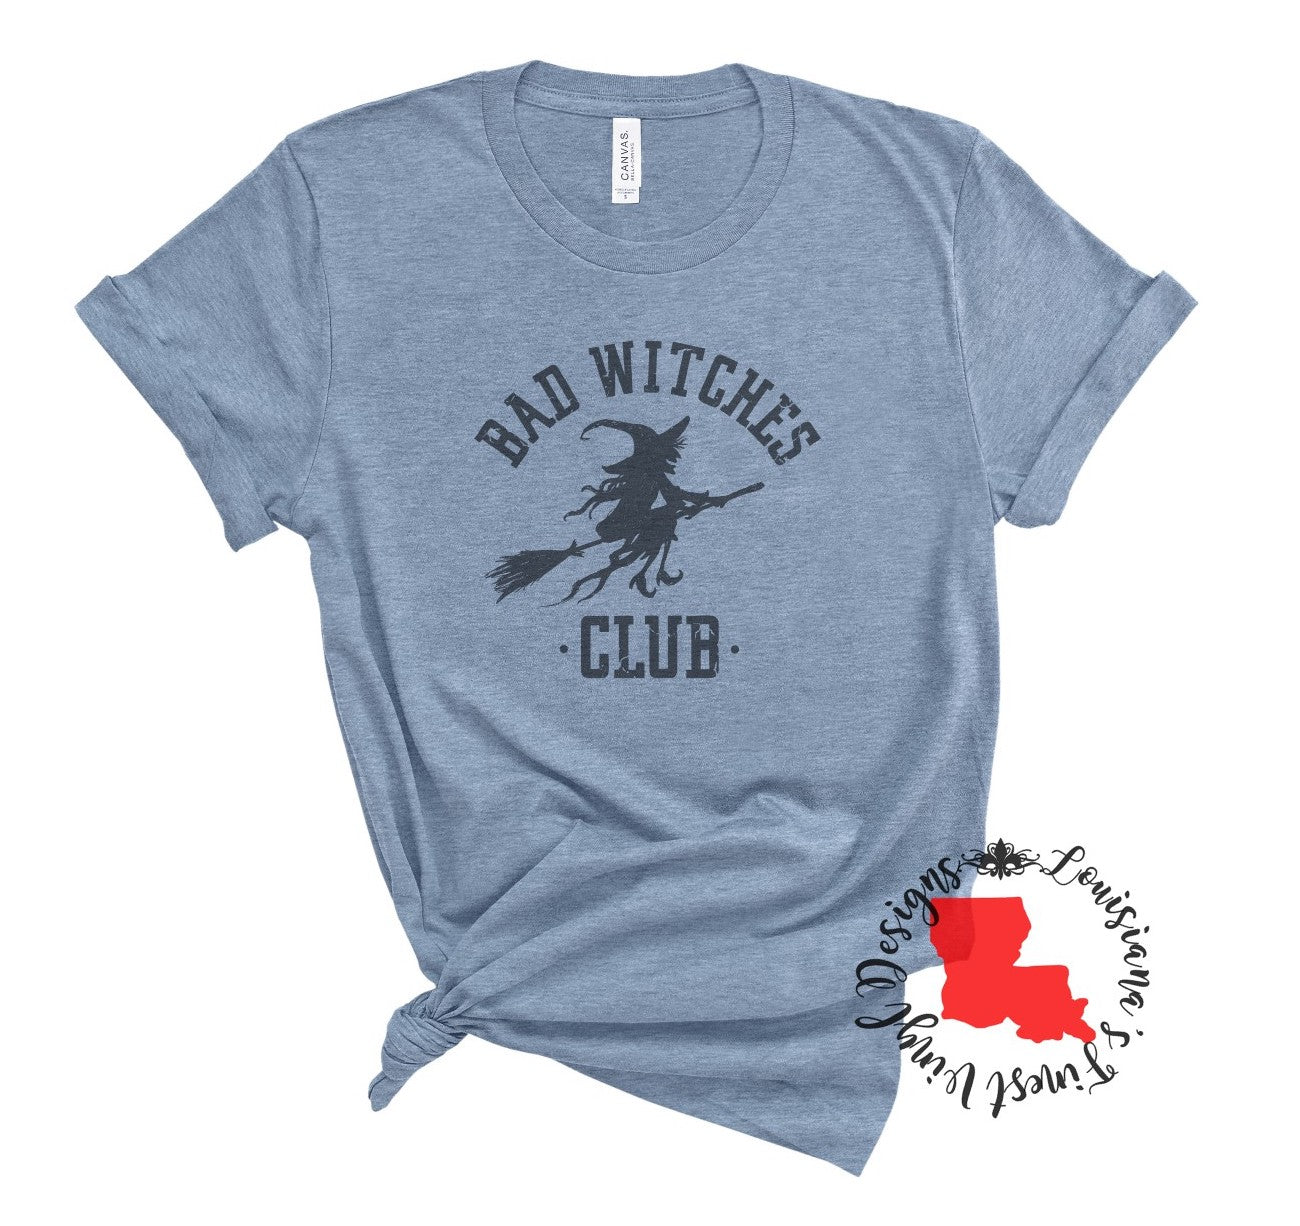 Bad Witches Club Tee